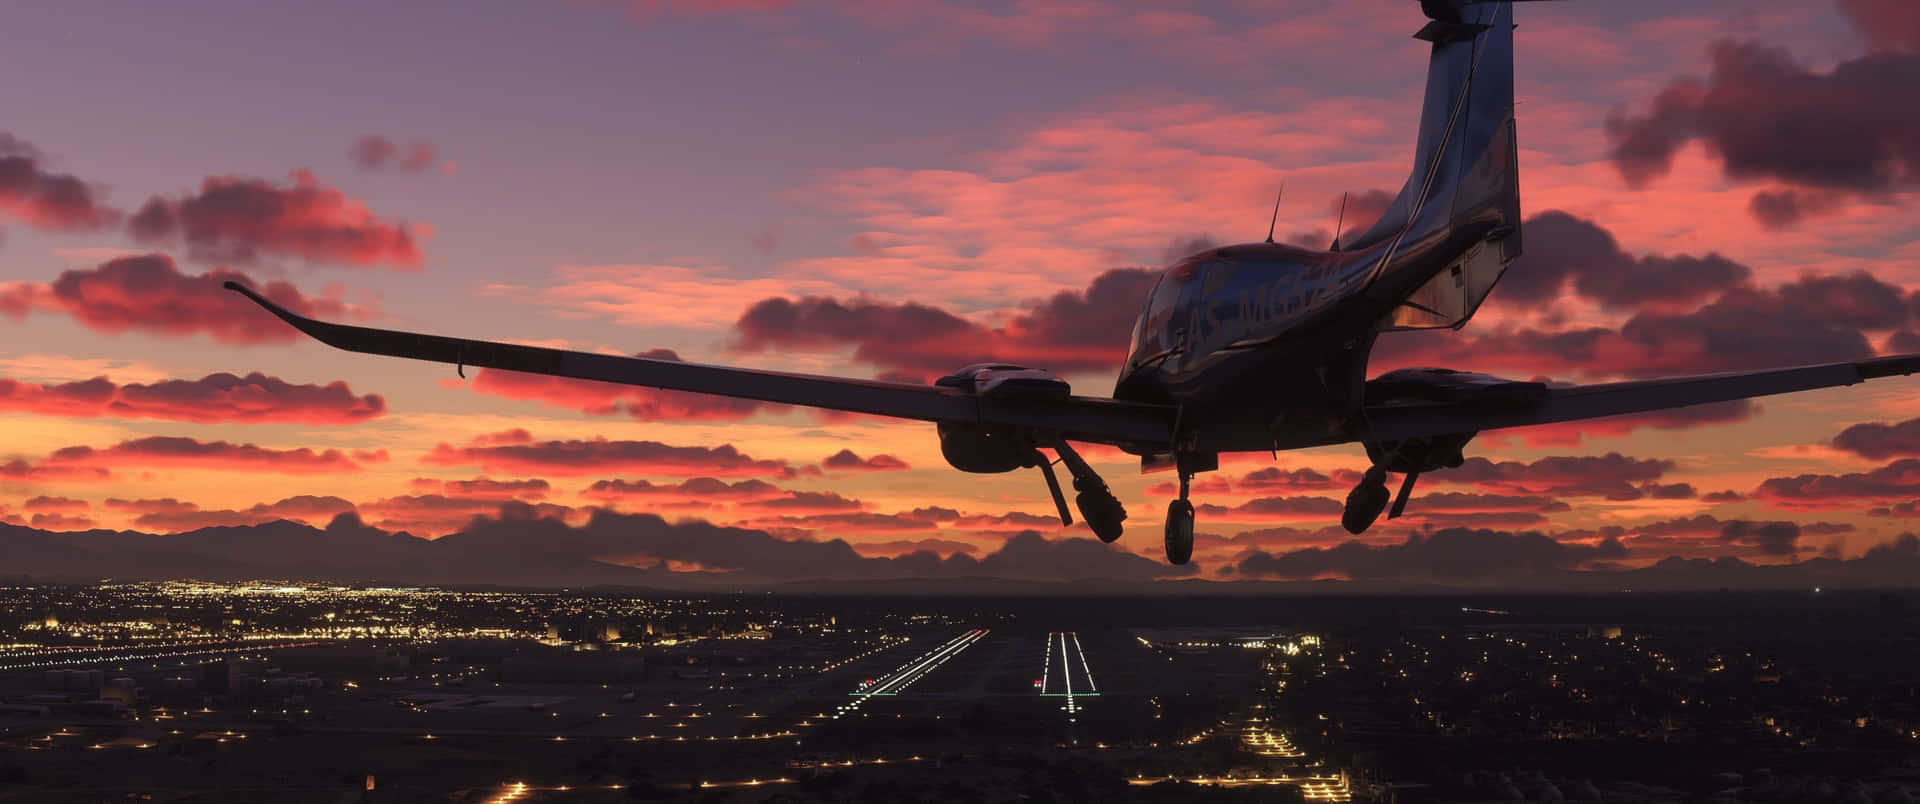 A Plane Flying Over A City At Sunset